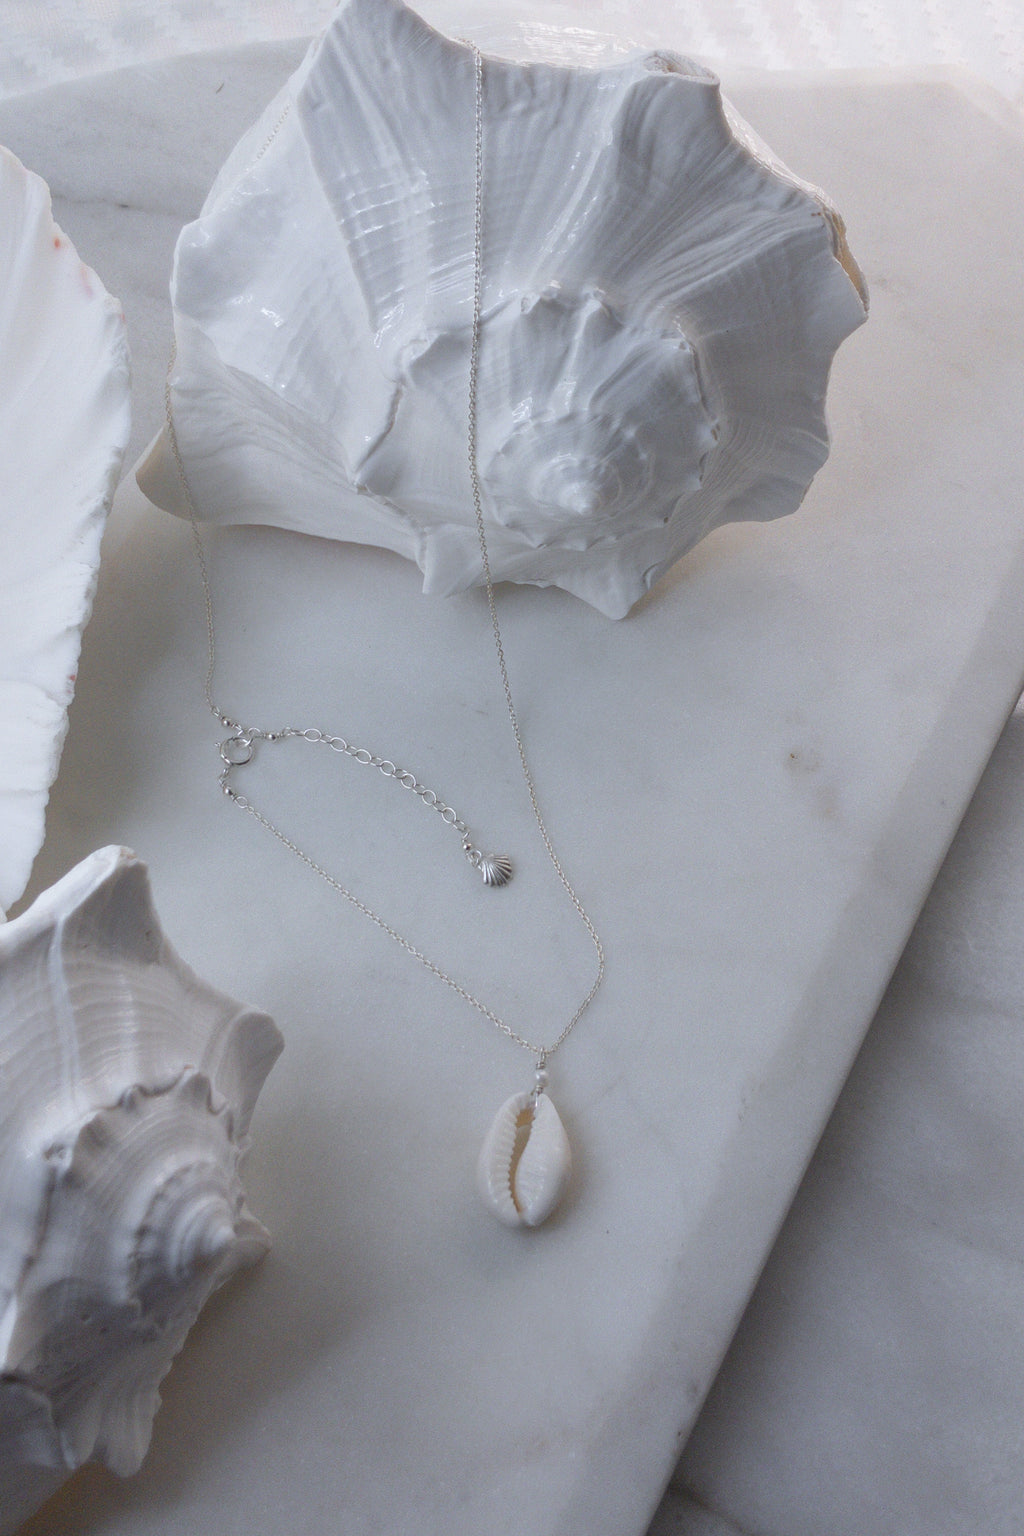 Cowrie Pearl Necklace - Sterling Silver